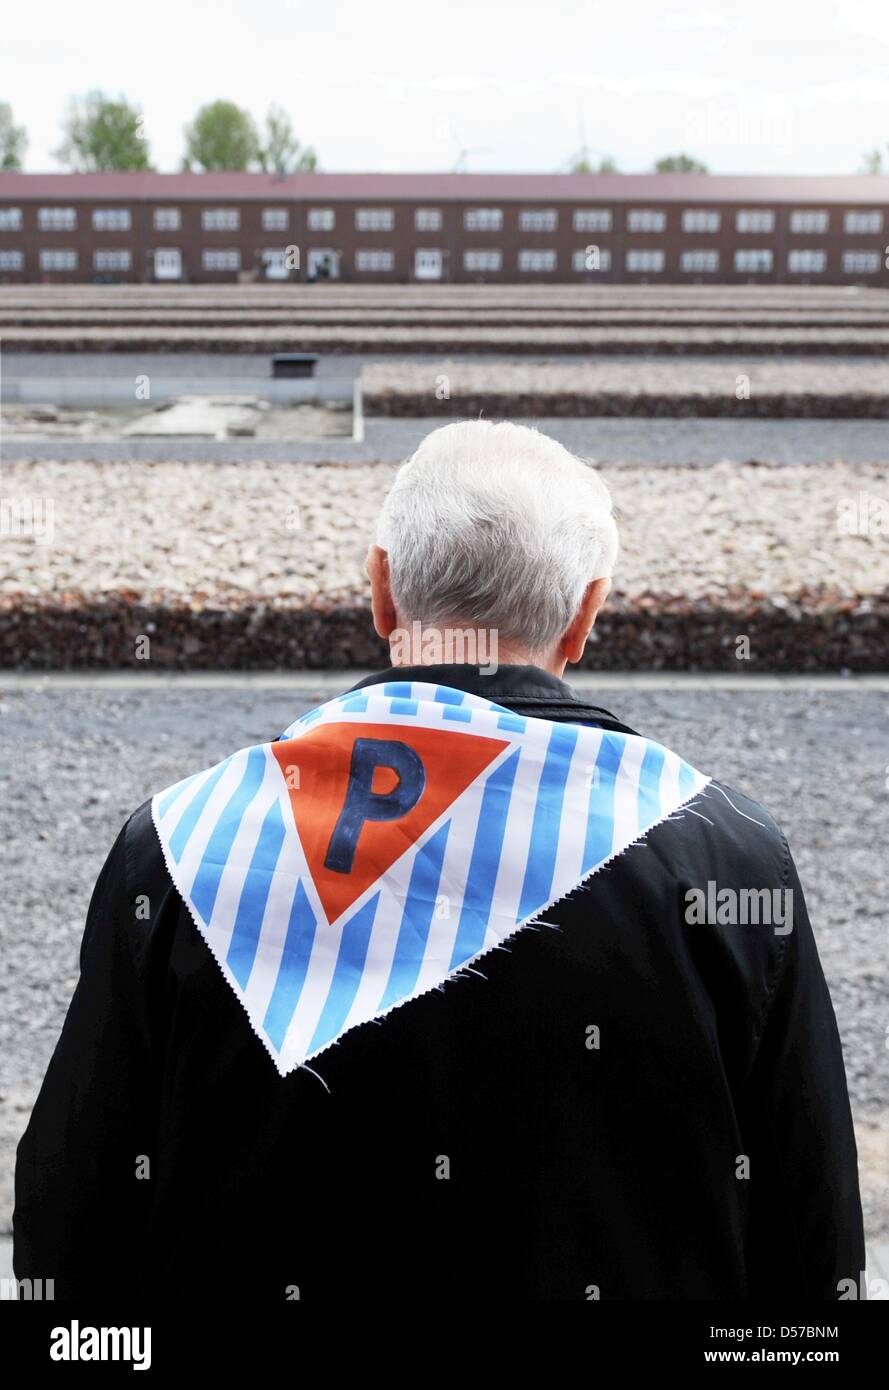 Survivor Stanislav Zalevski walks over the grounds of the former concentration camp Neuengamme in Hamburg, Germany, 04 May 2010. Survivors recollected their experiences within the scope of the 65th anniversary of the camp's liberation. Photo: MAURIZIO GAMBARINI Stock Photo